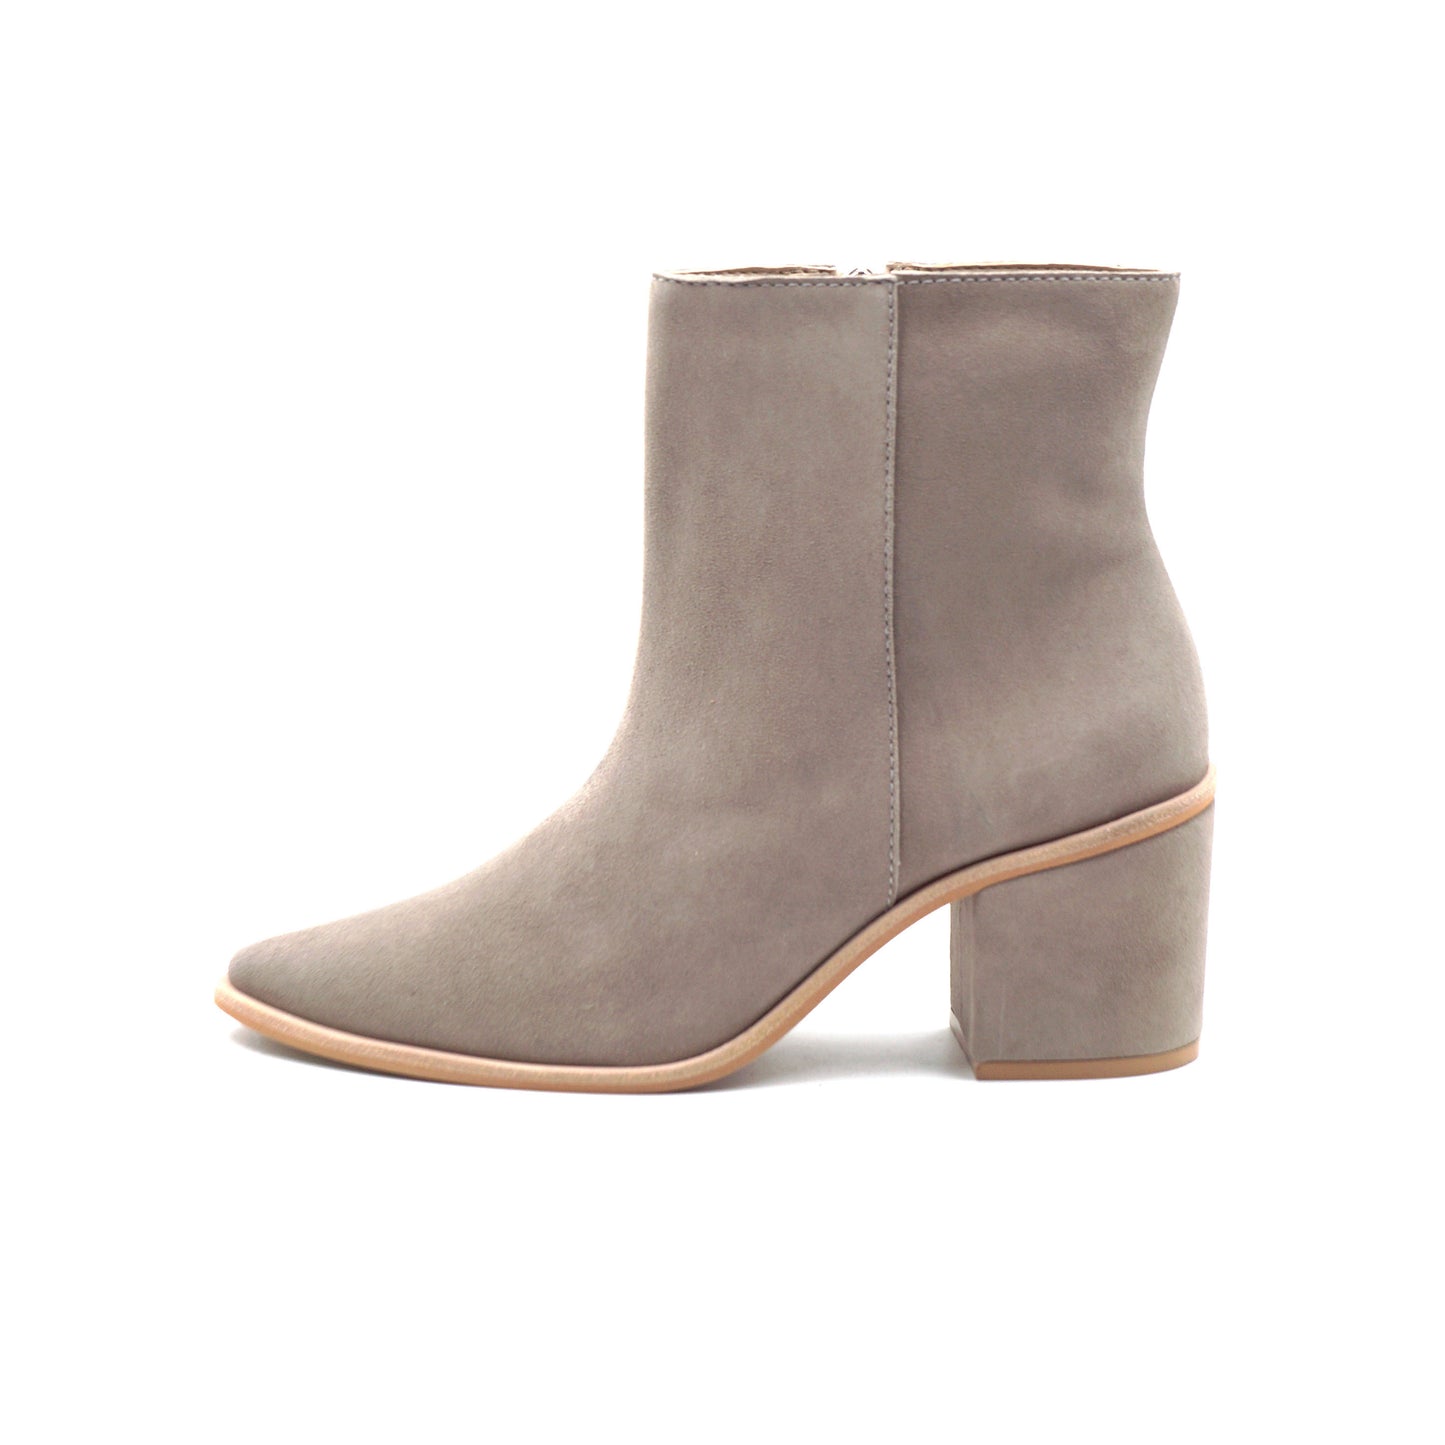 Kaanas, Carricante Pointy Suede Bootie